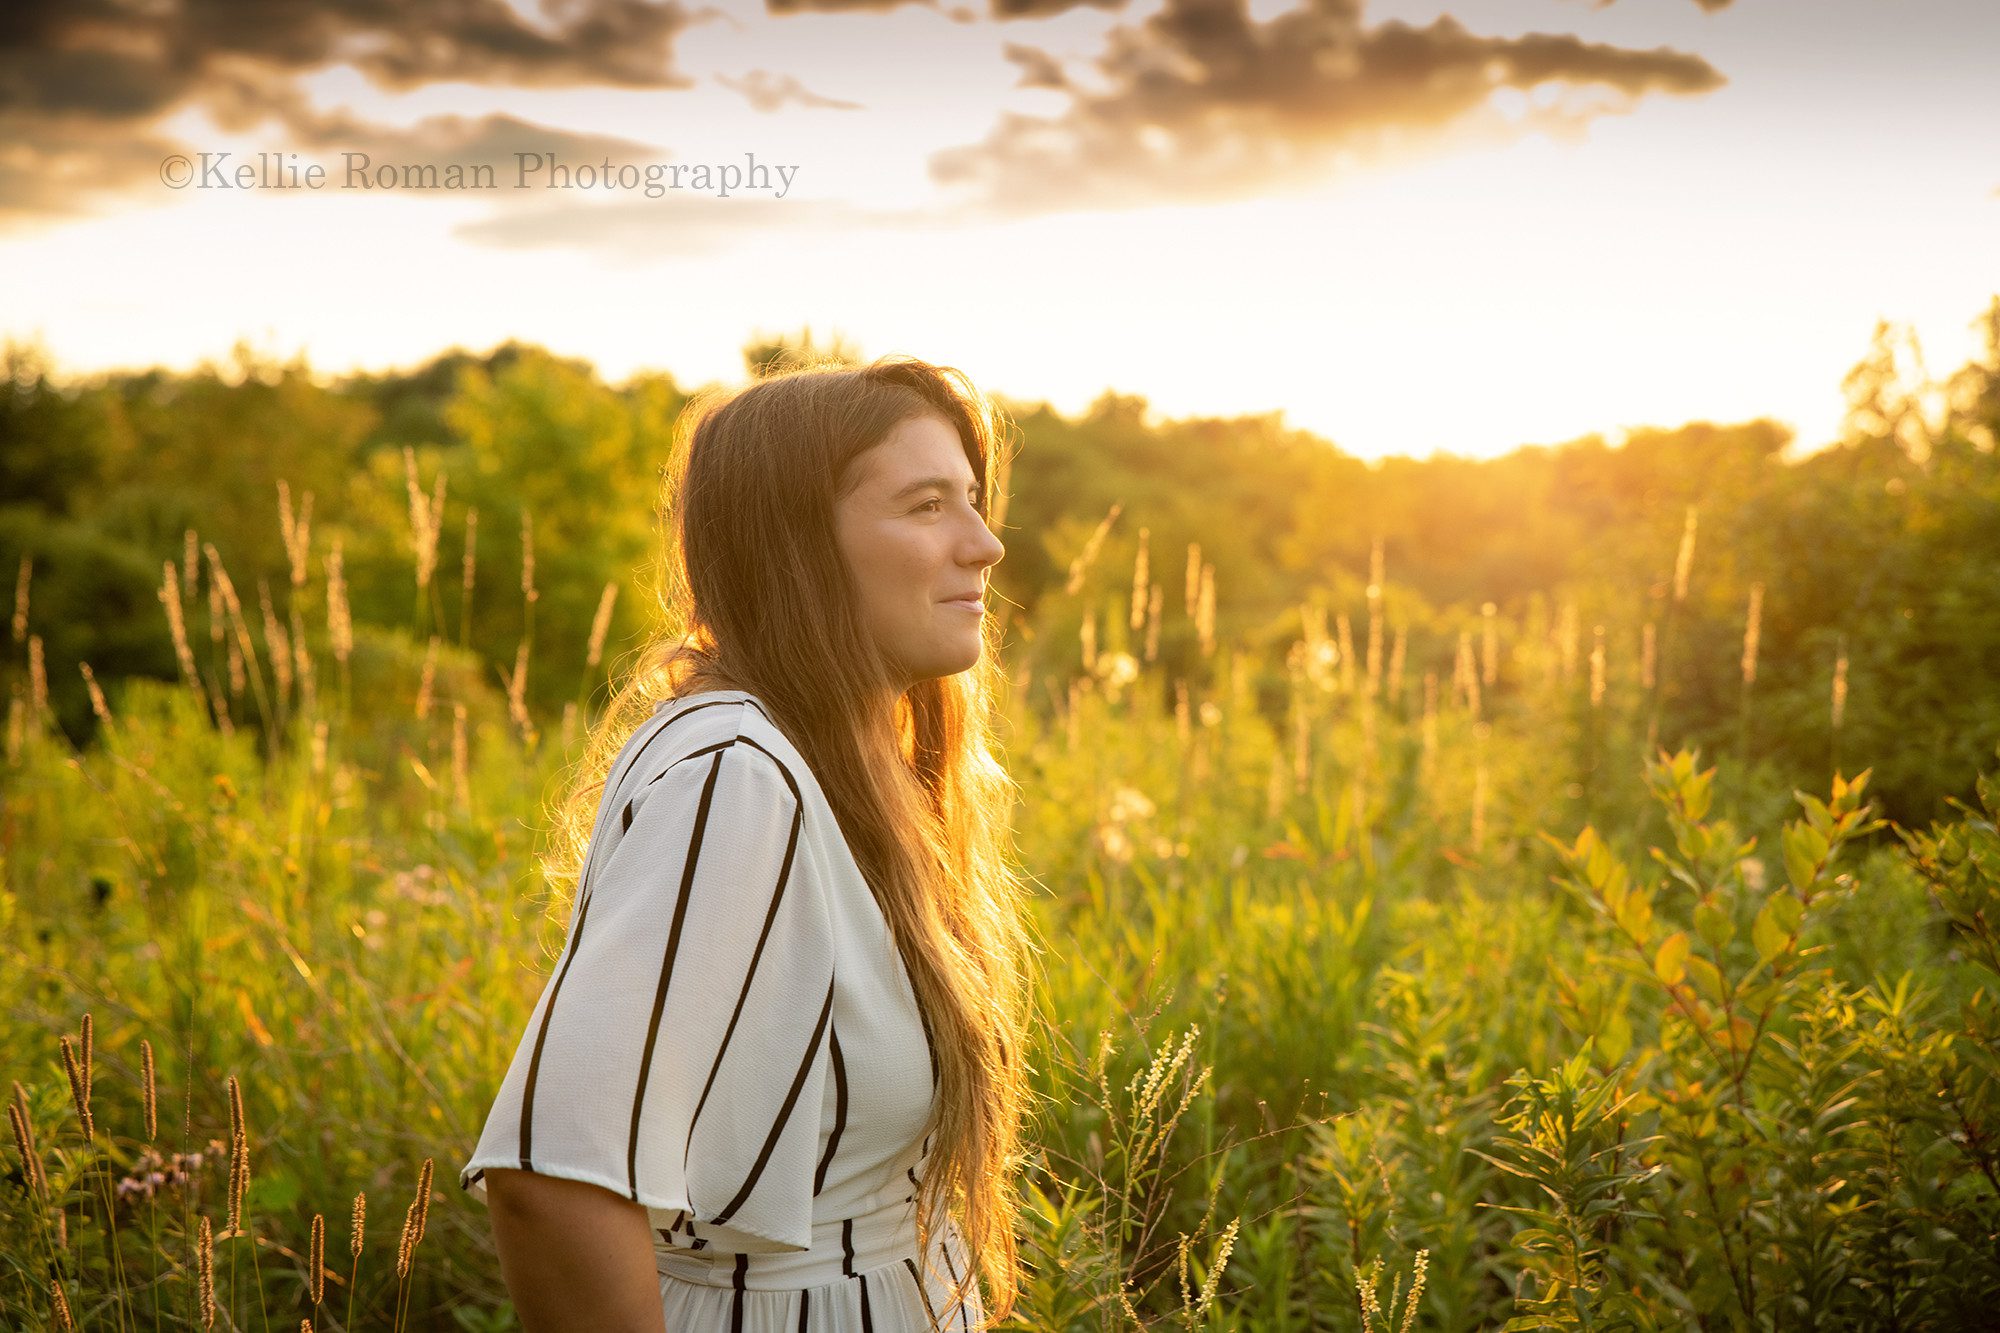 boho inspired a teenage girl standing in a field of tall green grass and flowers being lit up by the setting sun she has long hair and is looking off to the side